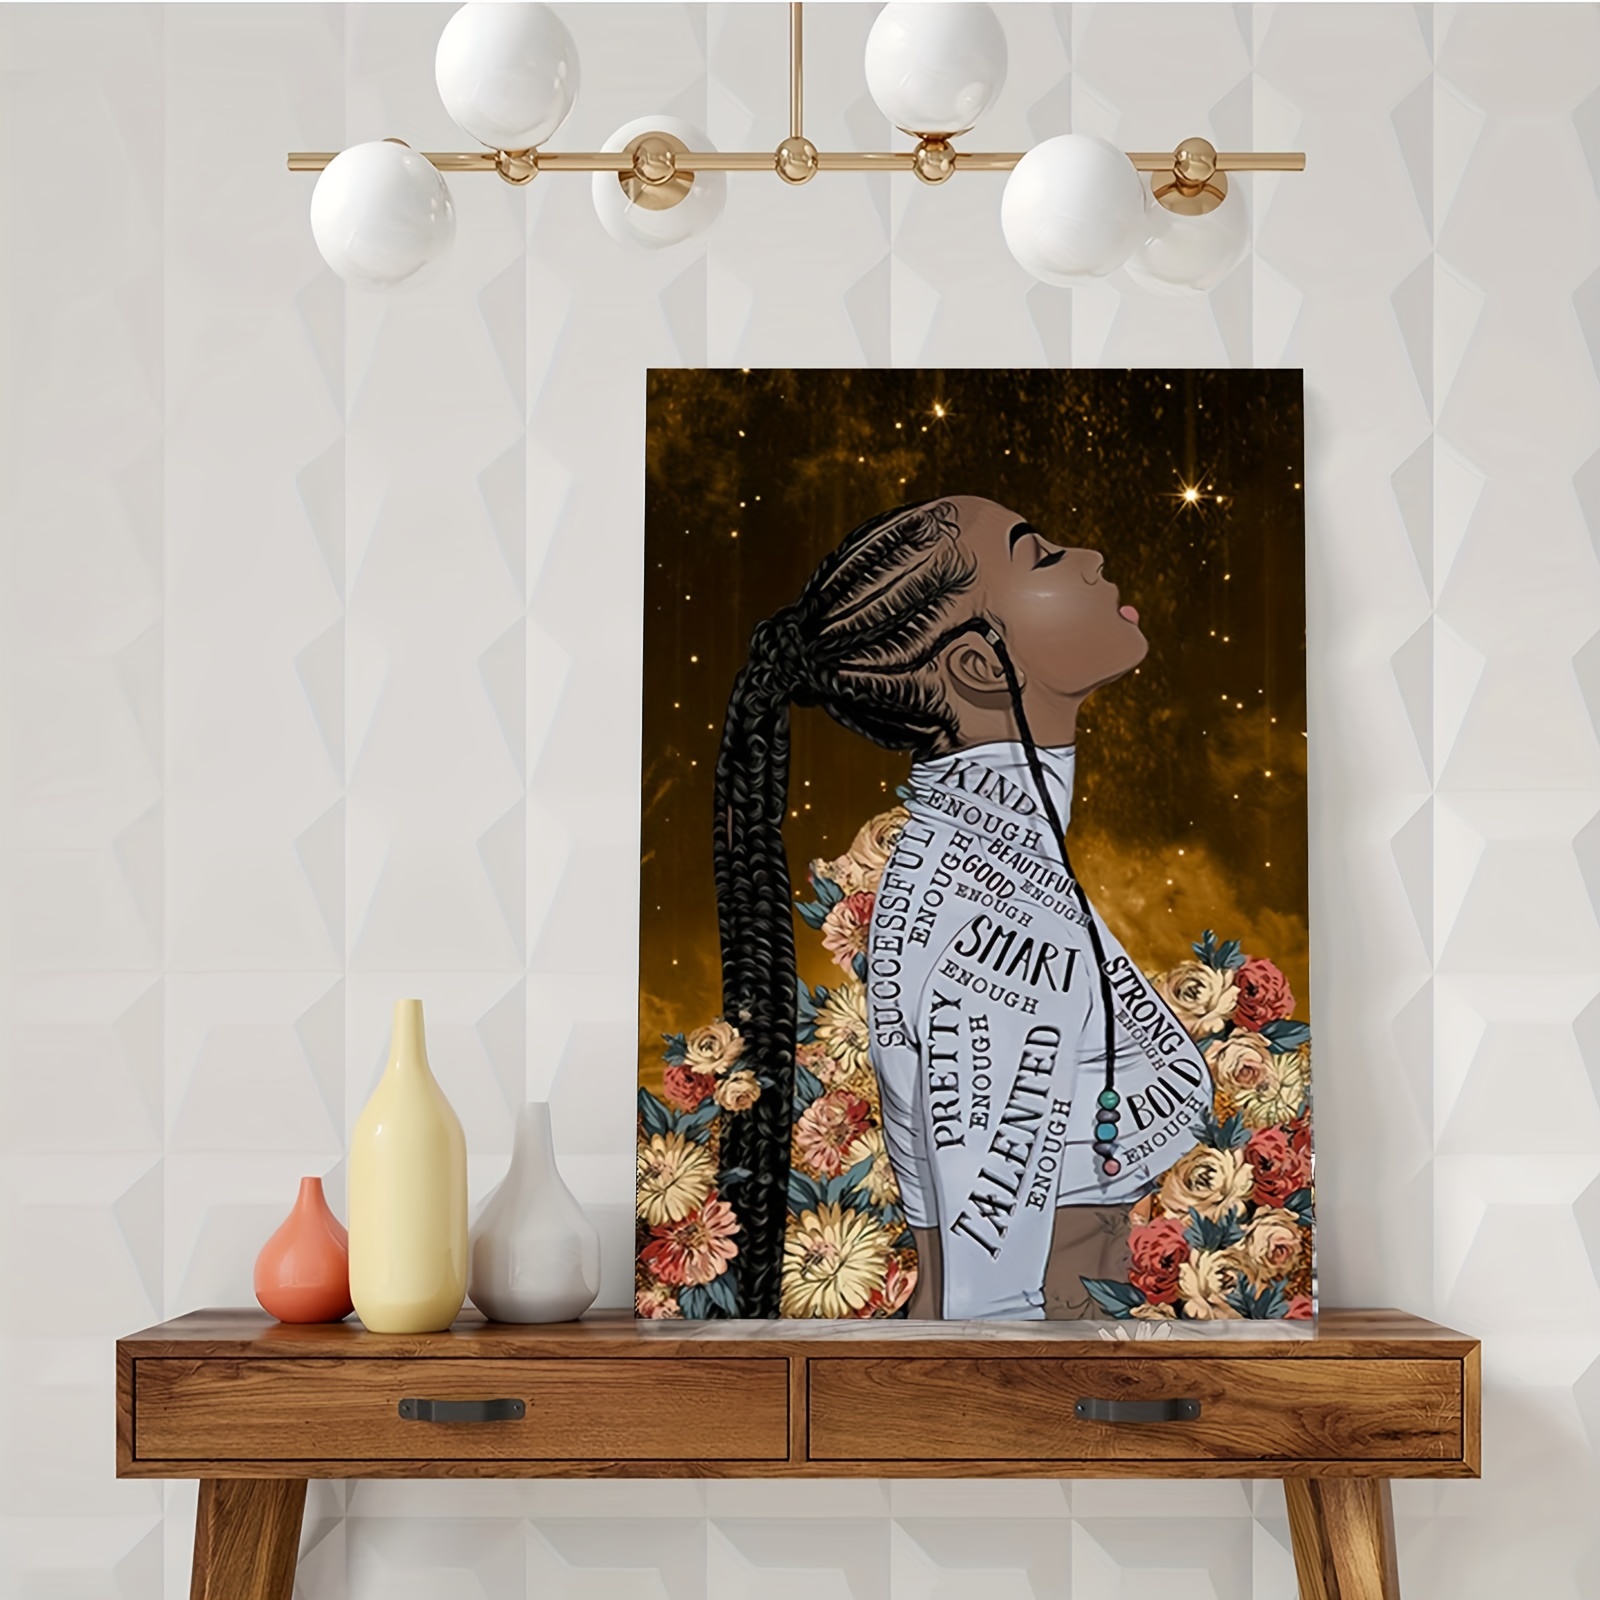 Black Art Paintings for Wall Decorations Afro African American Black Woman  Portrait Canvas Wall Art Prints Artwork Inspirational Quotes Wall Decor for